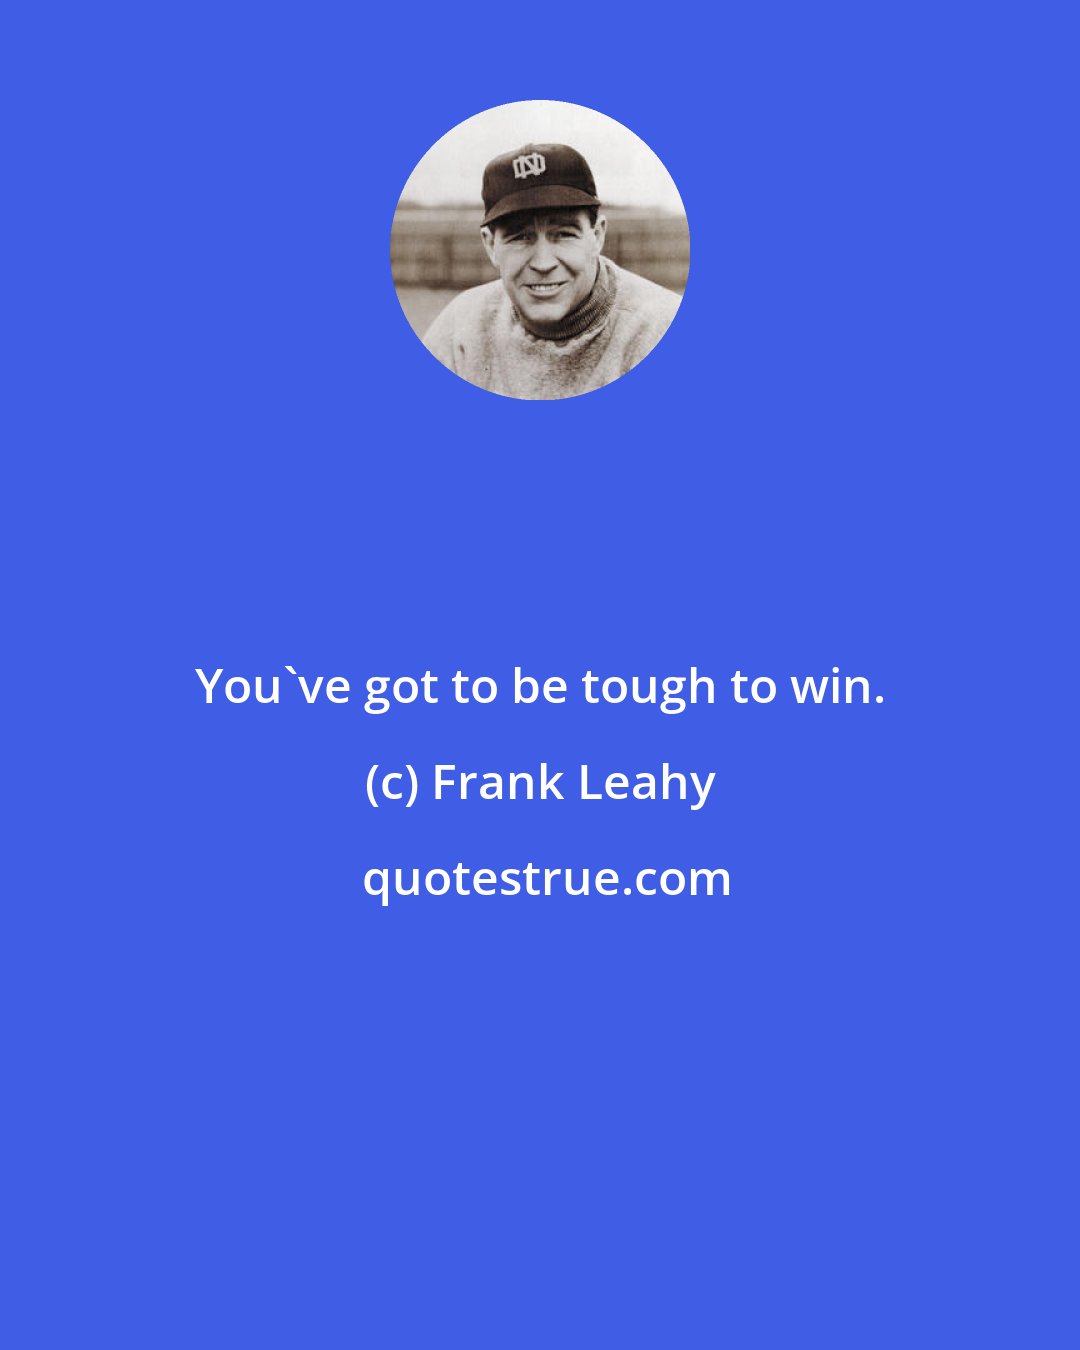 Frank Leahy: You've got to be tough to win.